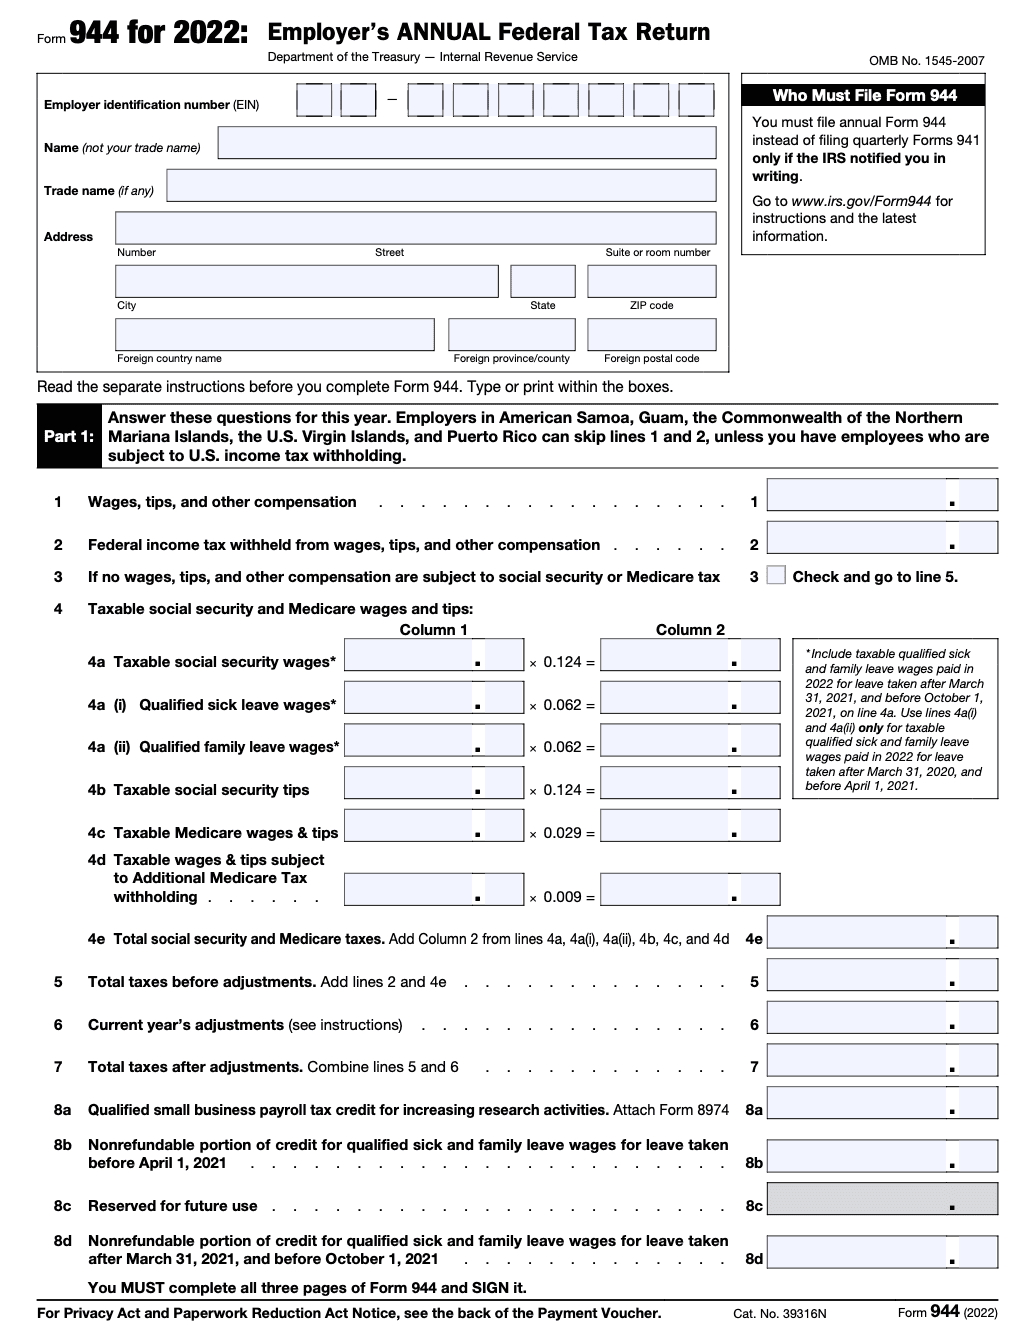 form-944-guide-federal-tax-return-for-small-businesses.png